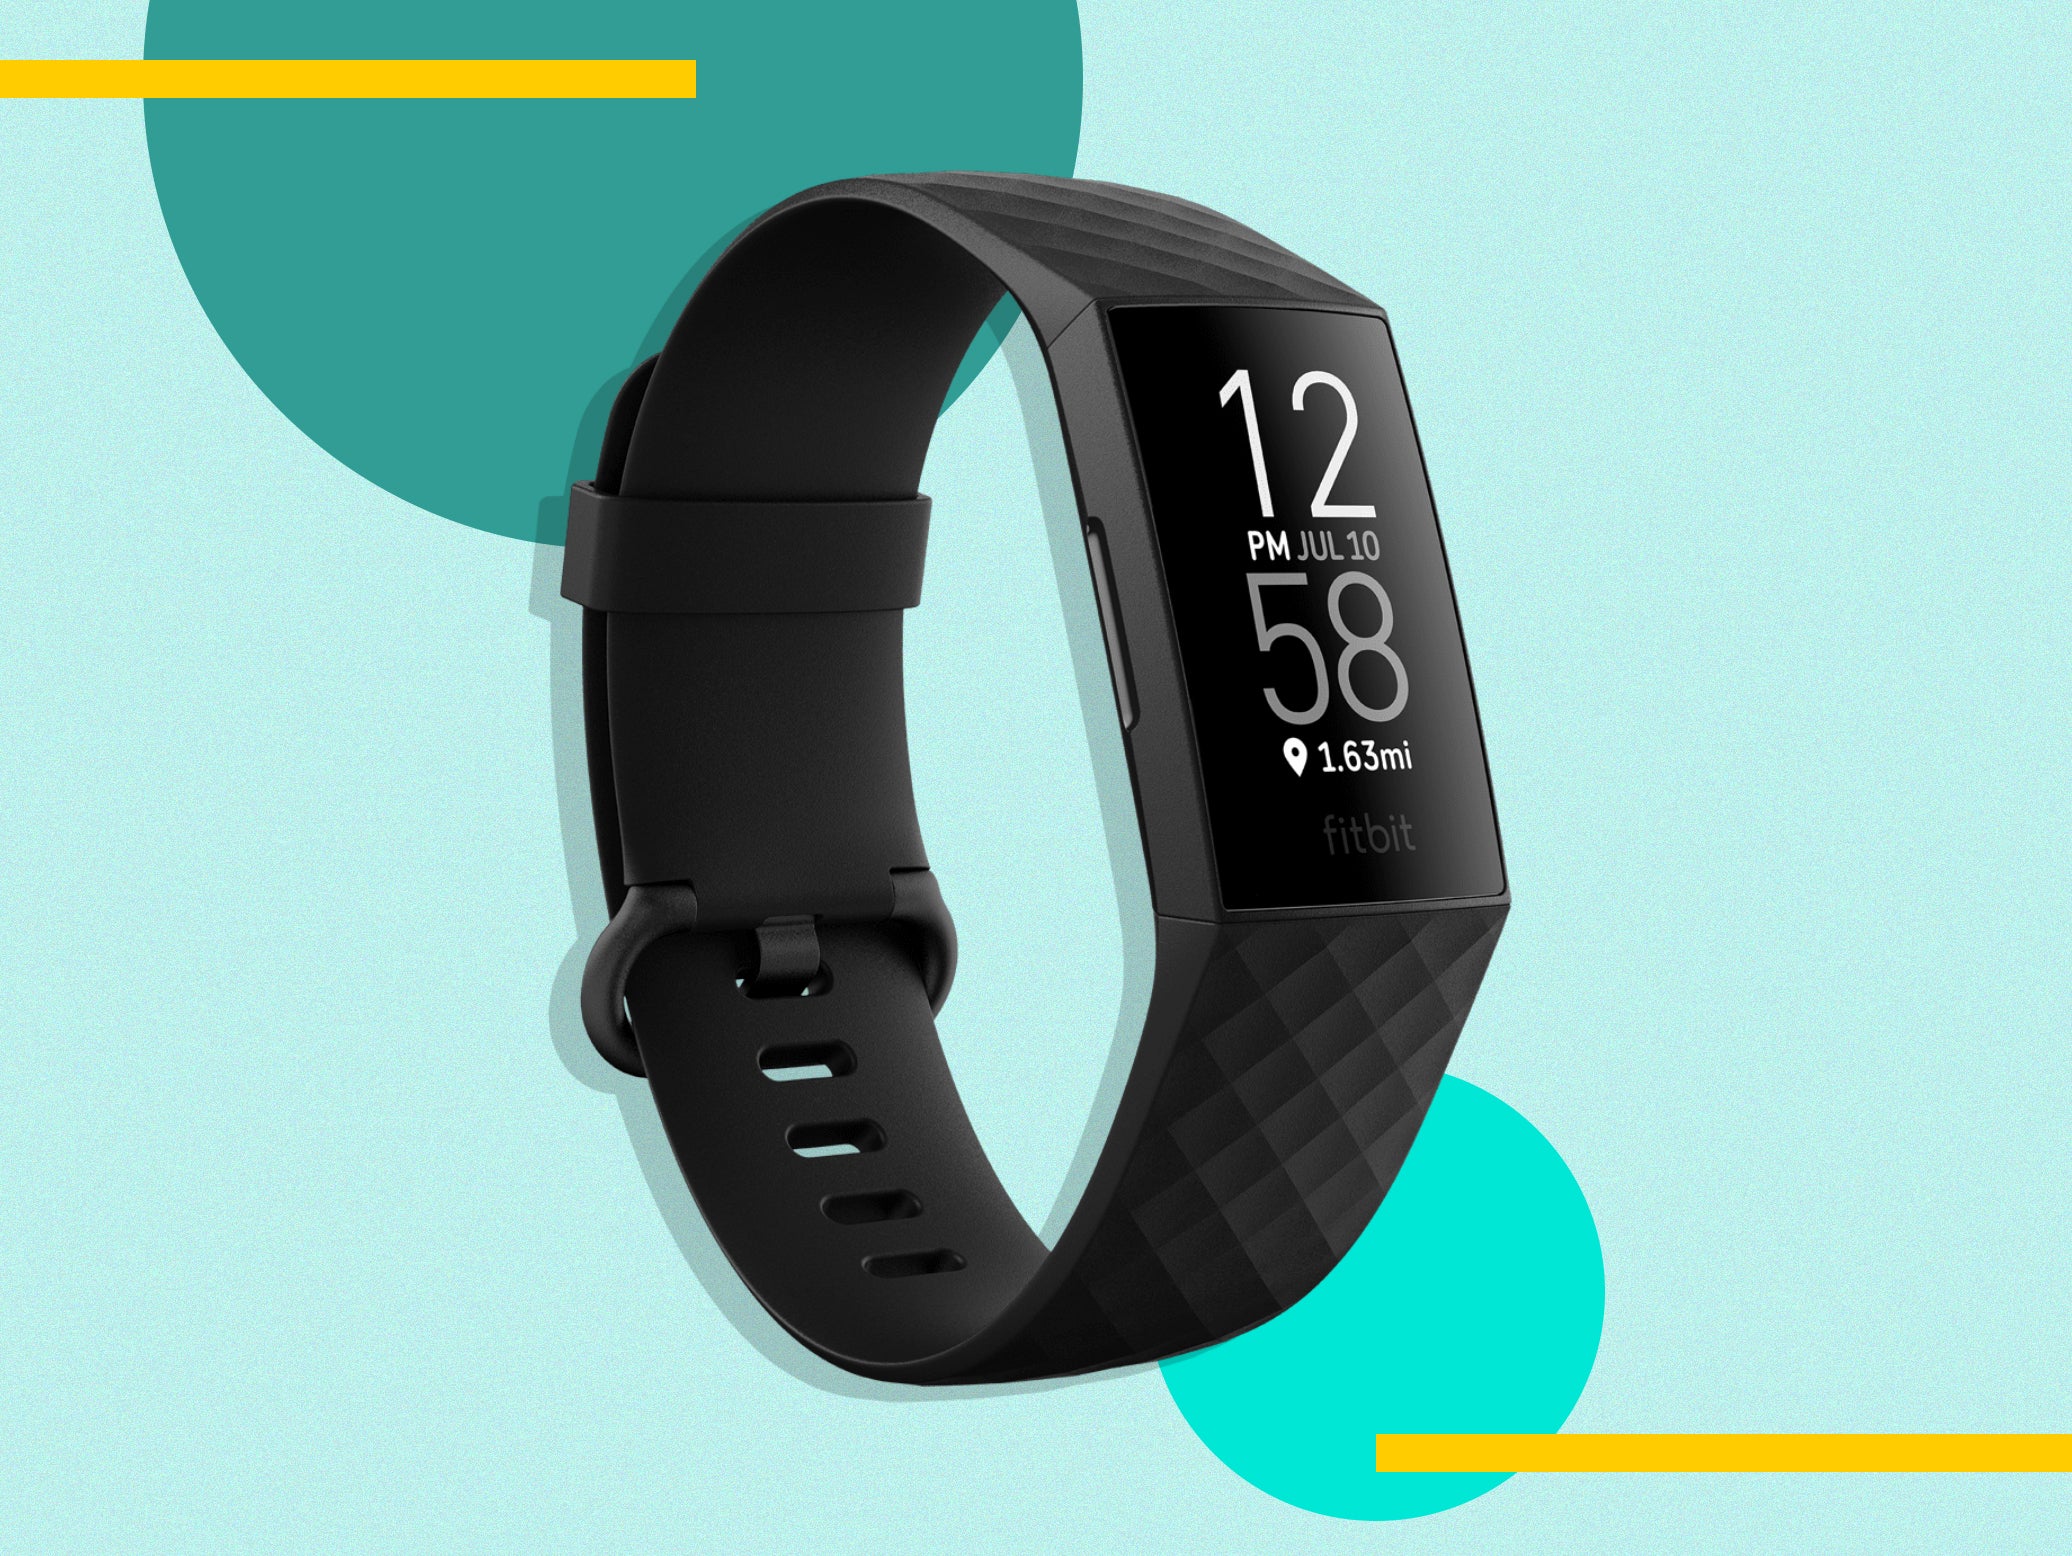 The wearable stayed with us while we walked, ran, exercised, worked and slept